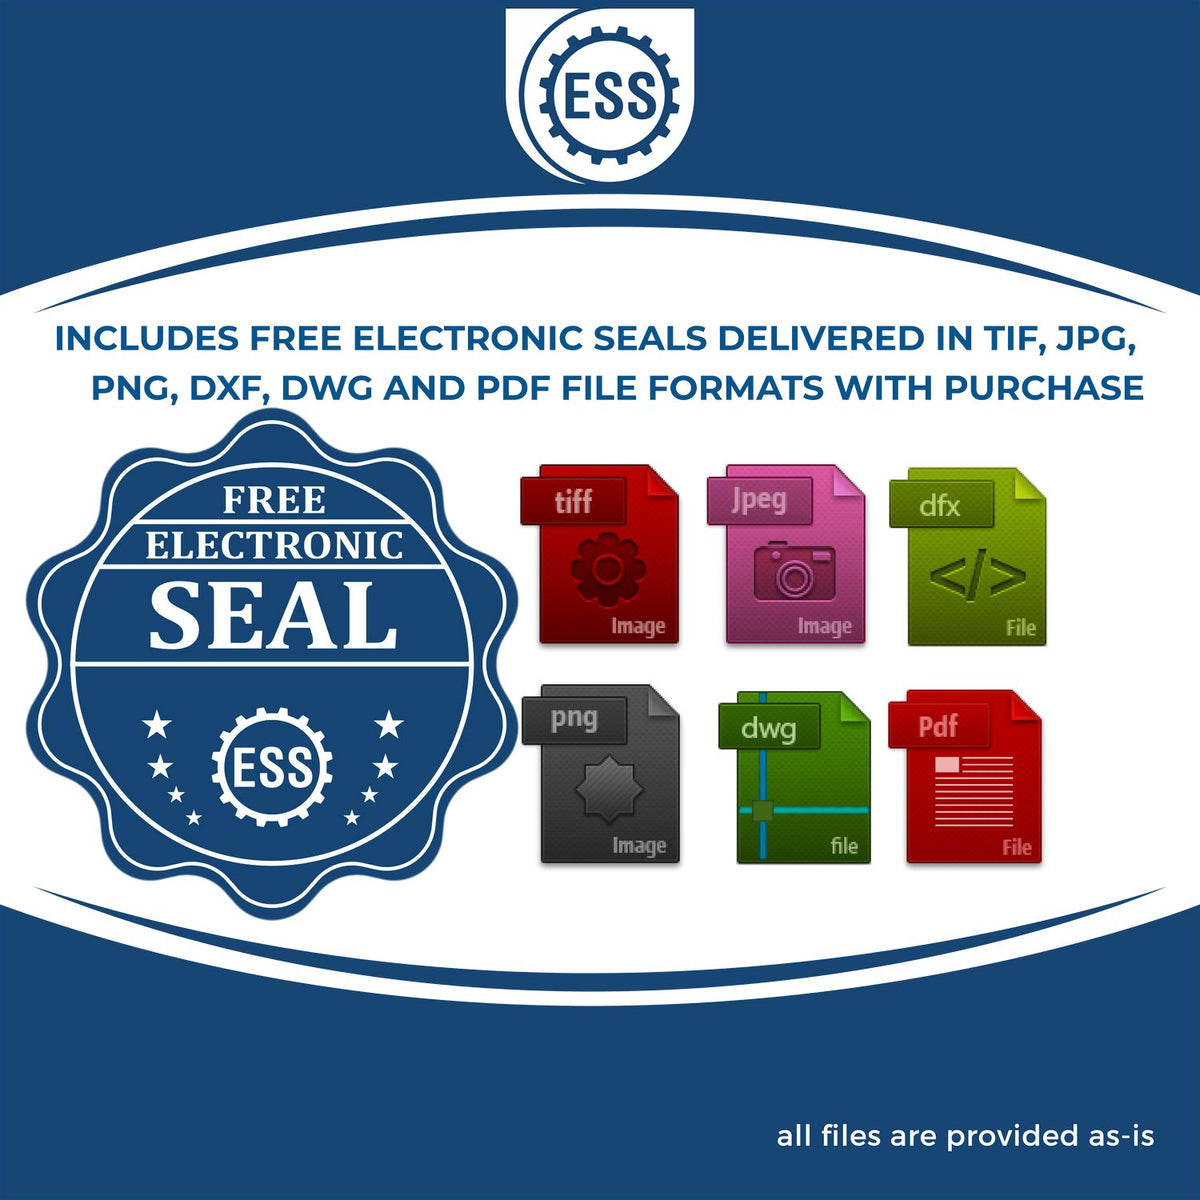 An infographic for the free electronic seal for the Gift South Dakota Architect Seal illustrating the different file type icons such as DXF, DWG, TIF, JPG and PNG.